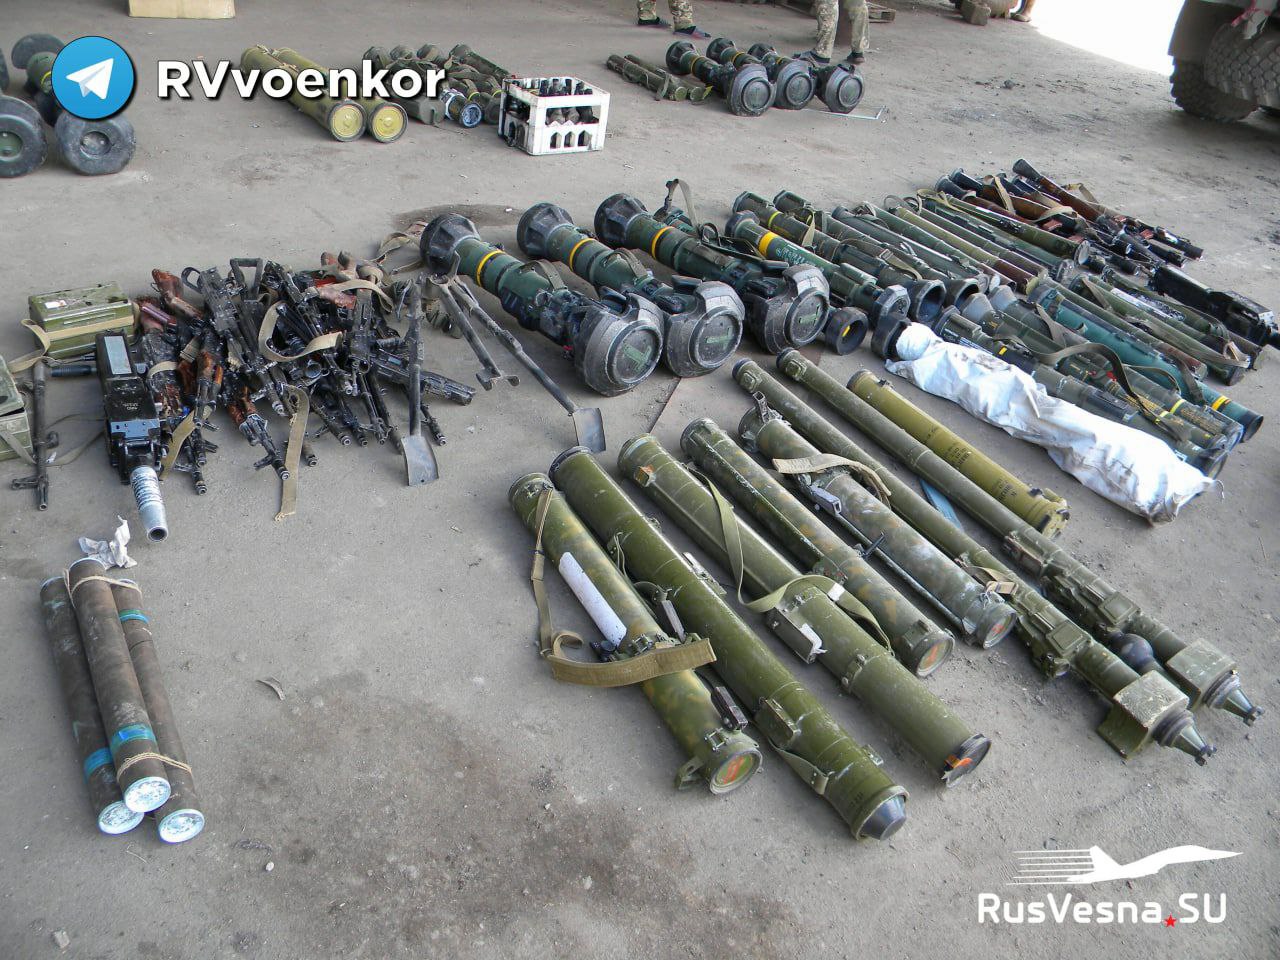 Russian Army Continues To Capture Western-Made Anti-Tank Weapons (Photos)